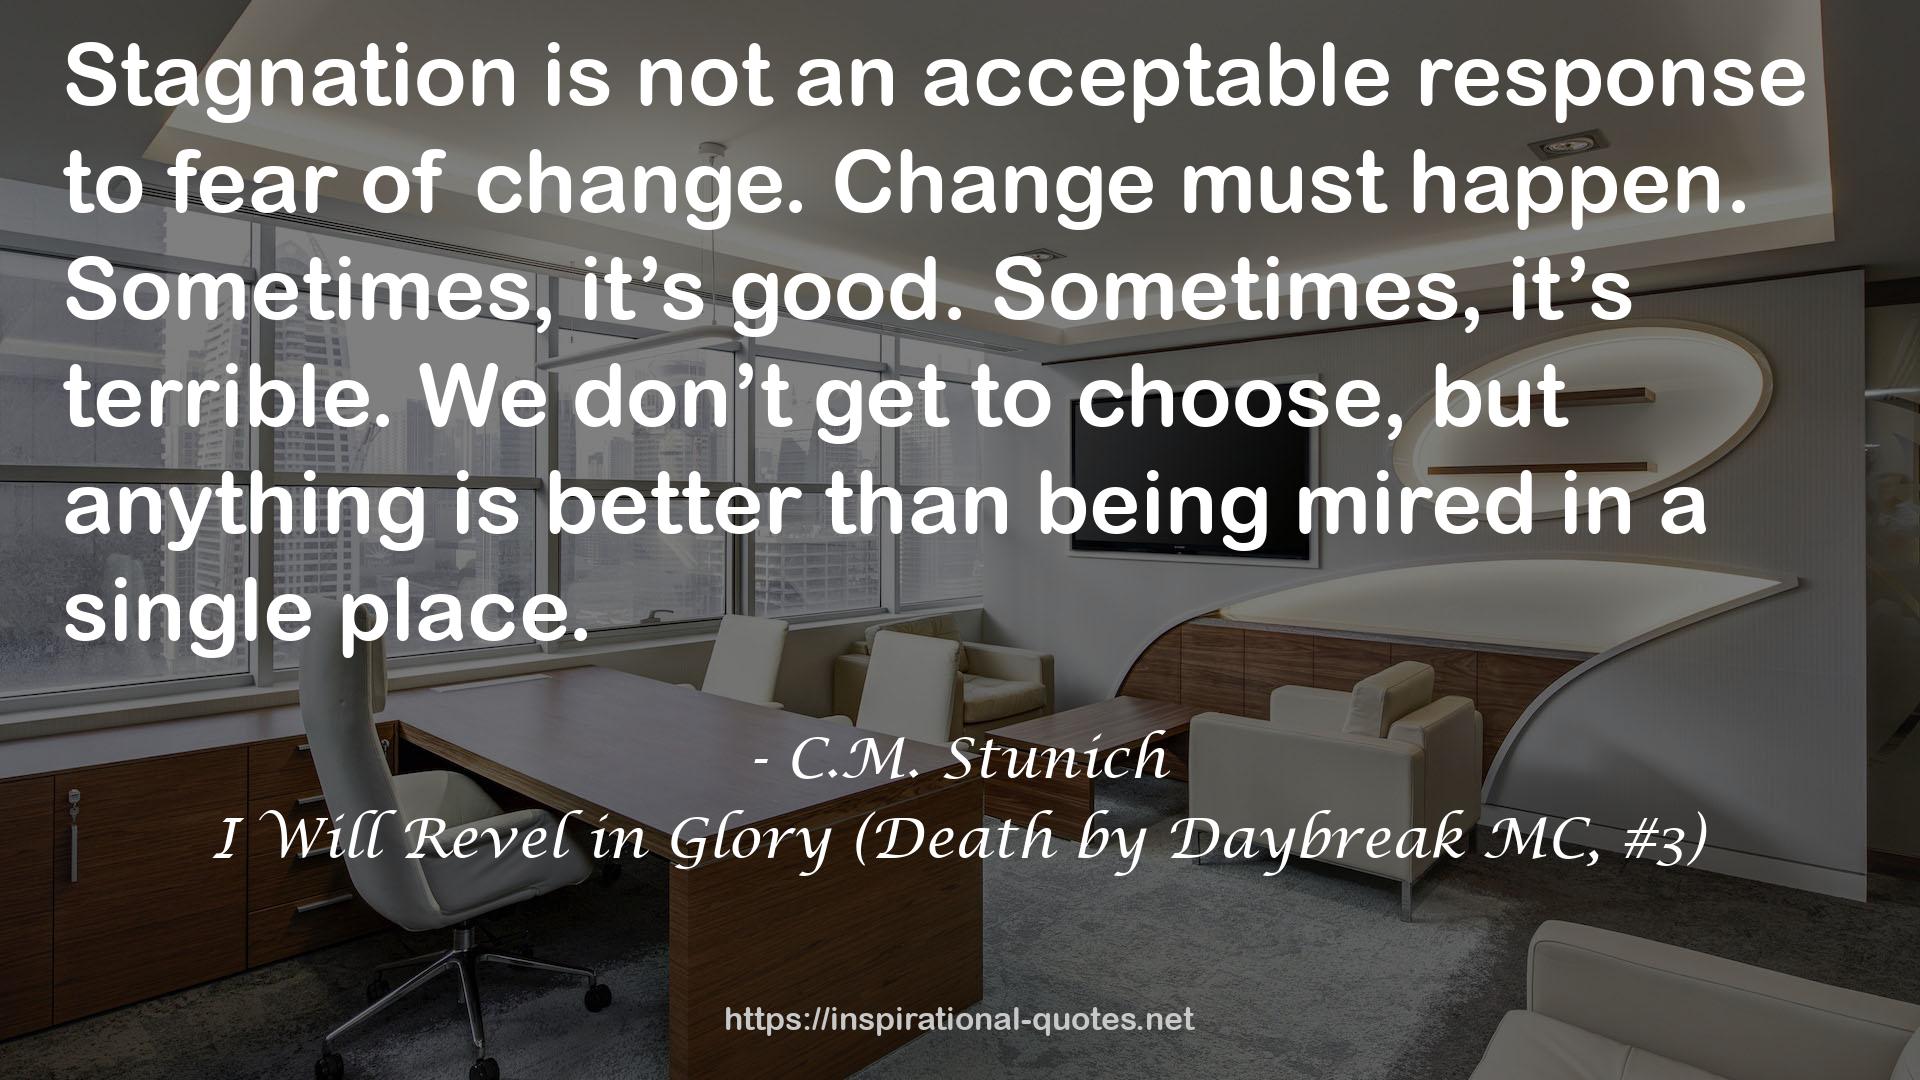 I Will Revel in Glory (Death by Daybreak MC, #3) QUOTES